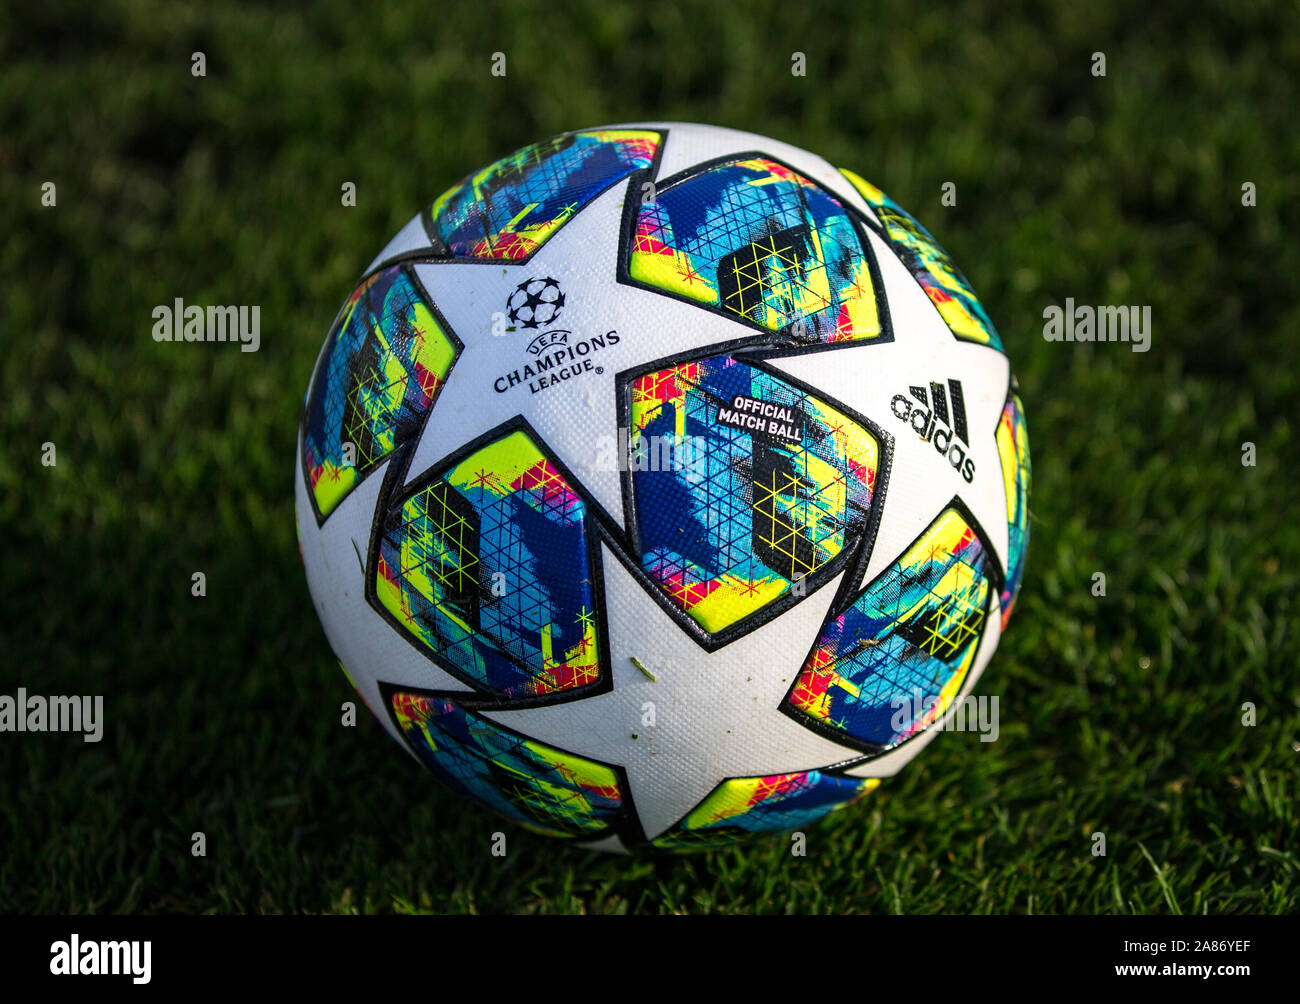 Adidas 2020 Finale Champions League Official Match Ball during the UEFA Youth League group match between Chelsea and Ajax U19 at Chelsea Ground, Cobham, England 5 November 2019.